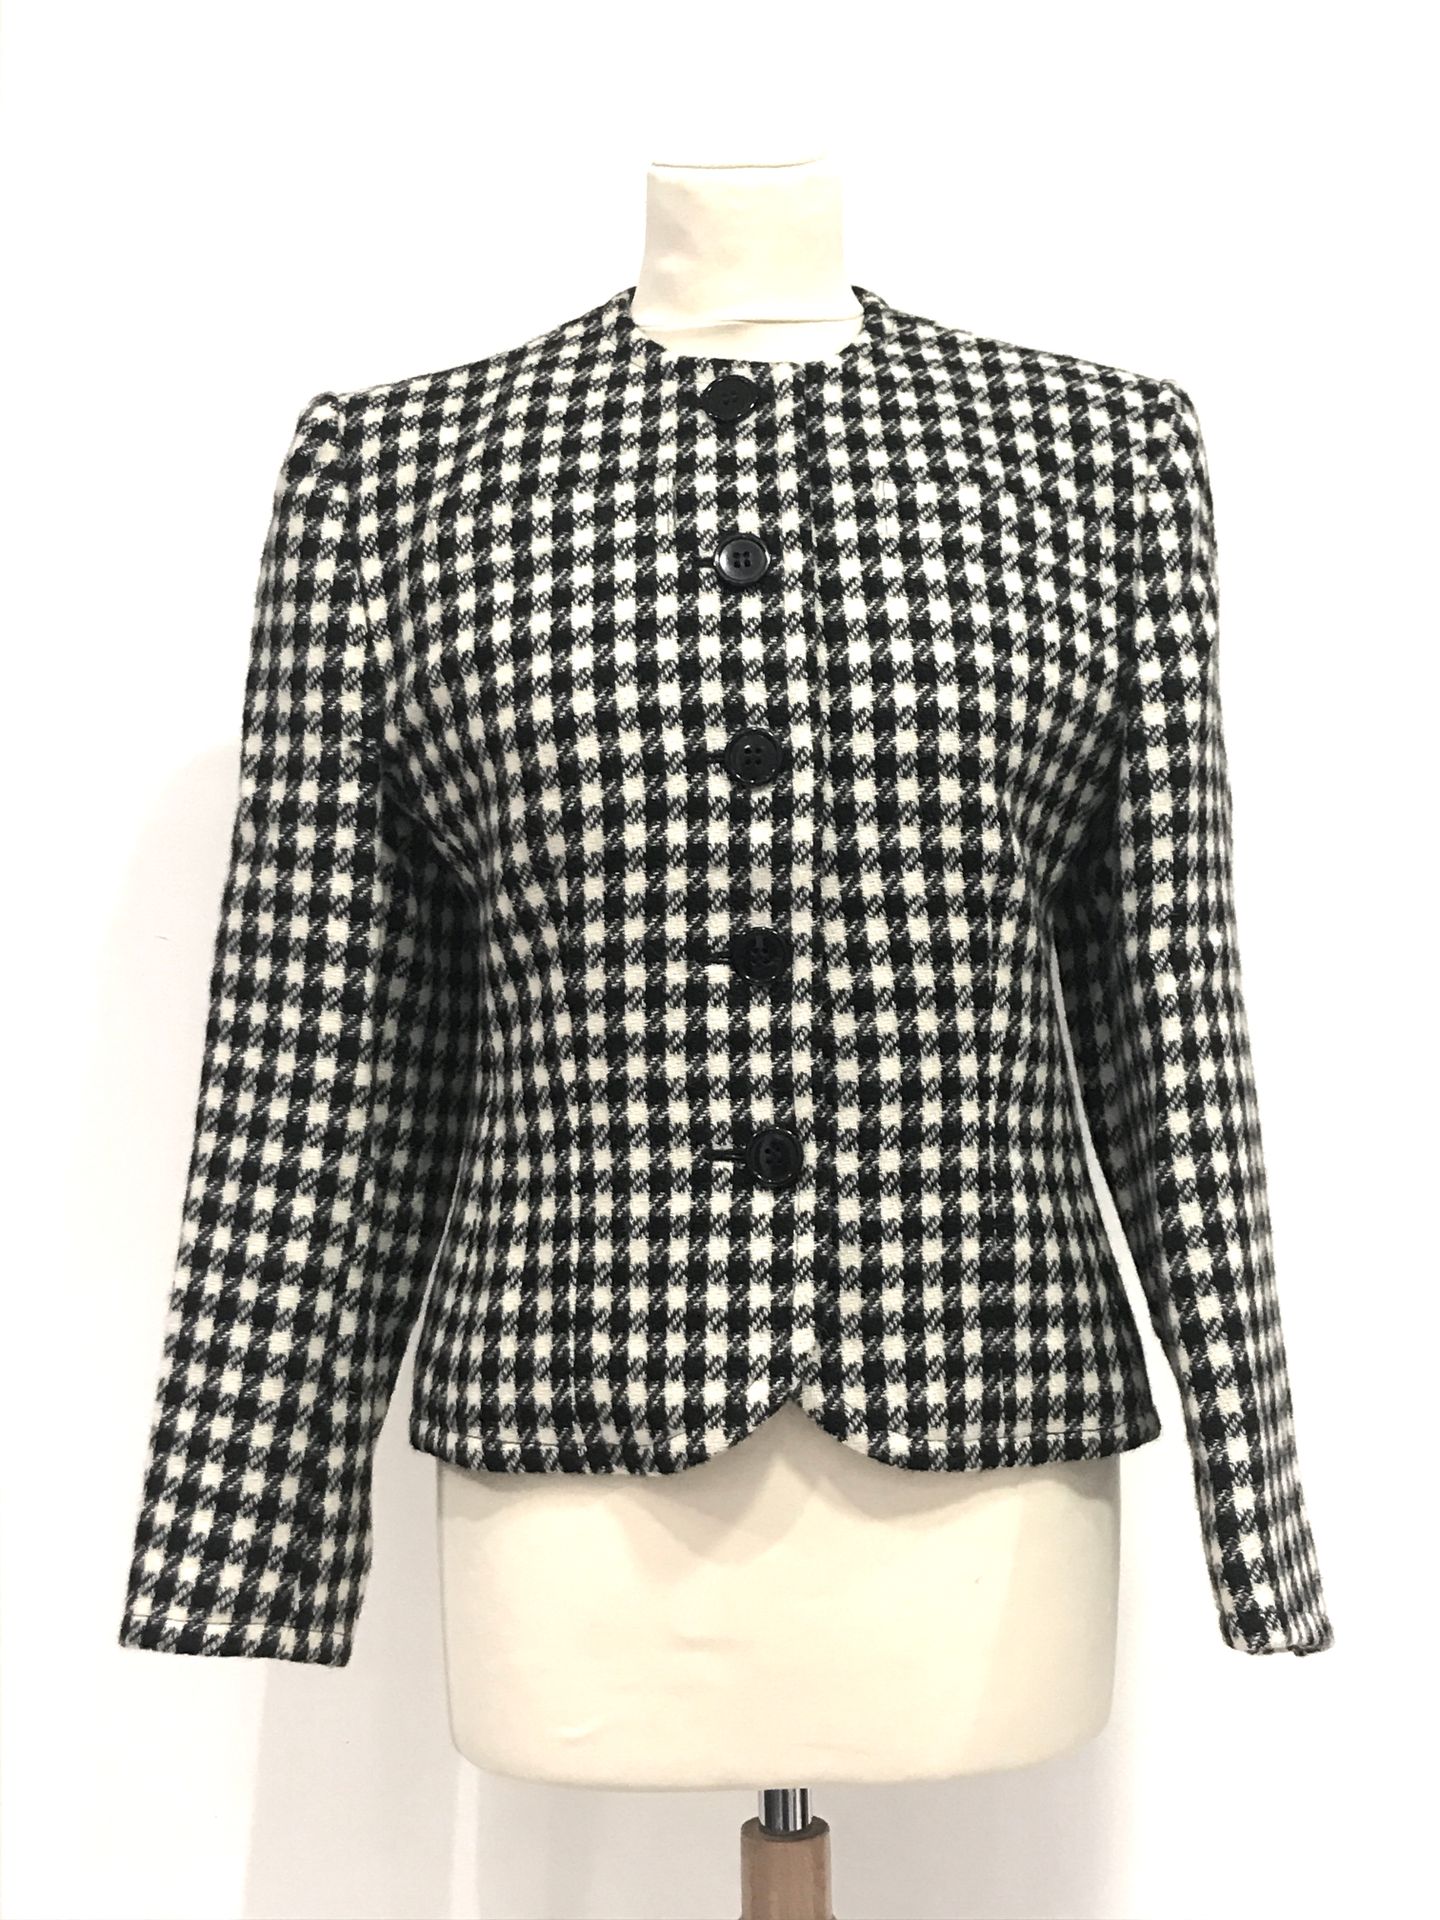 Null GUY LAROCHE - Wool suit jacket with white and black houndstooth pattern, cl&hellip;